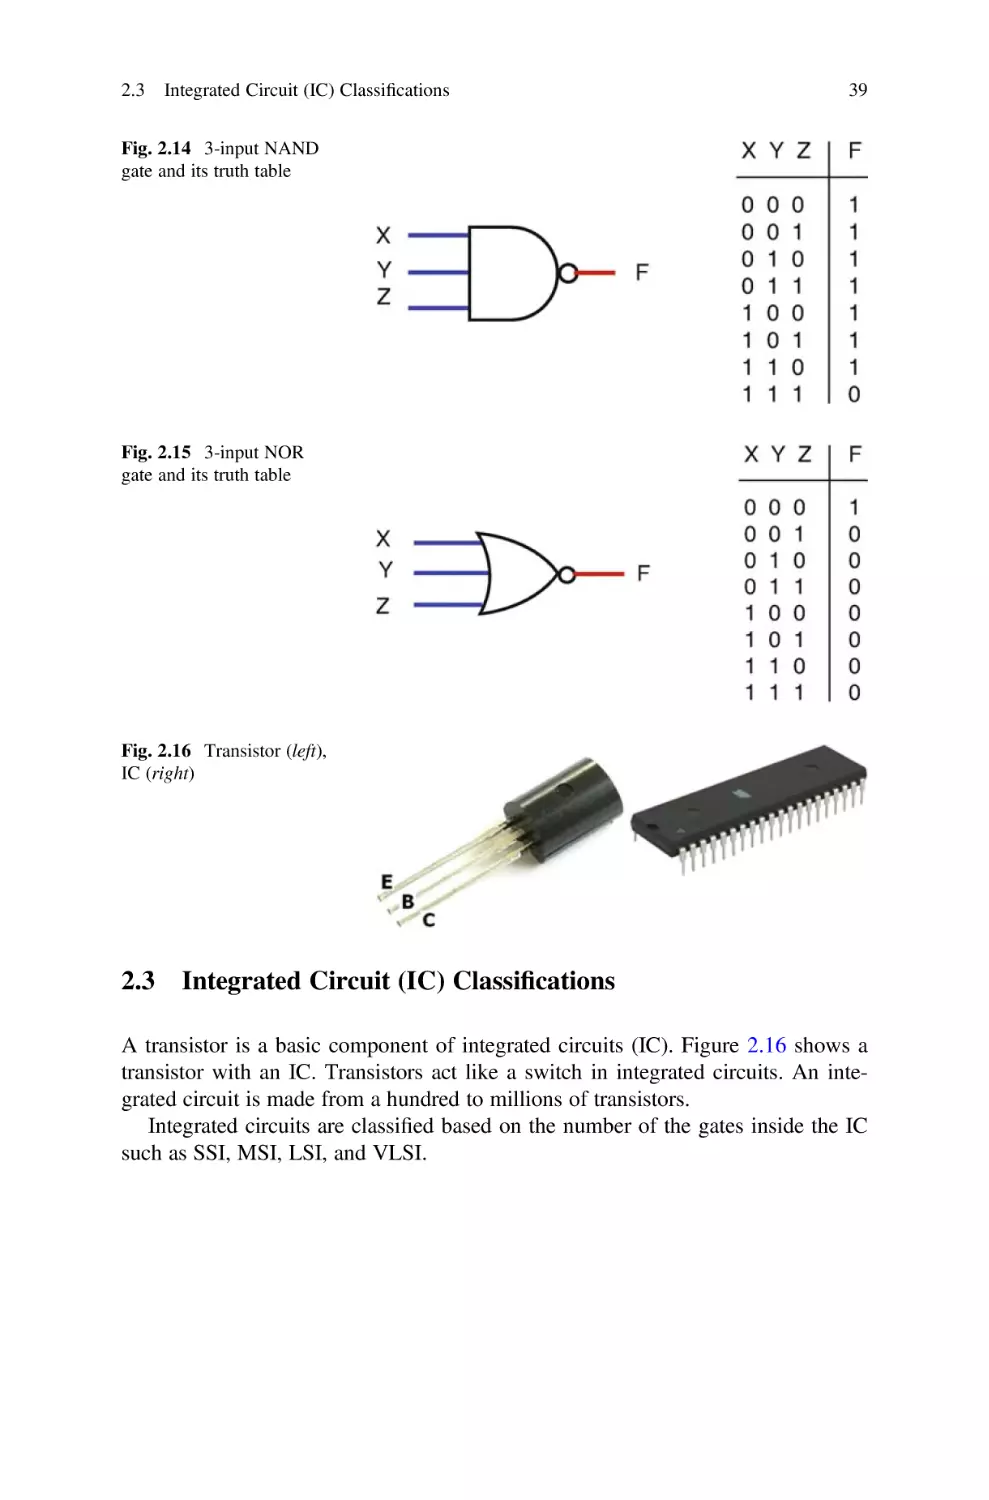 2.3 Integrated Circuit (IC) Classifications